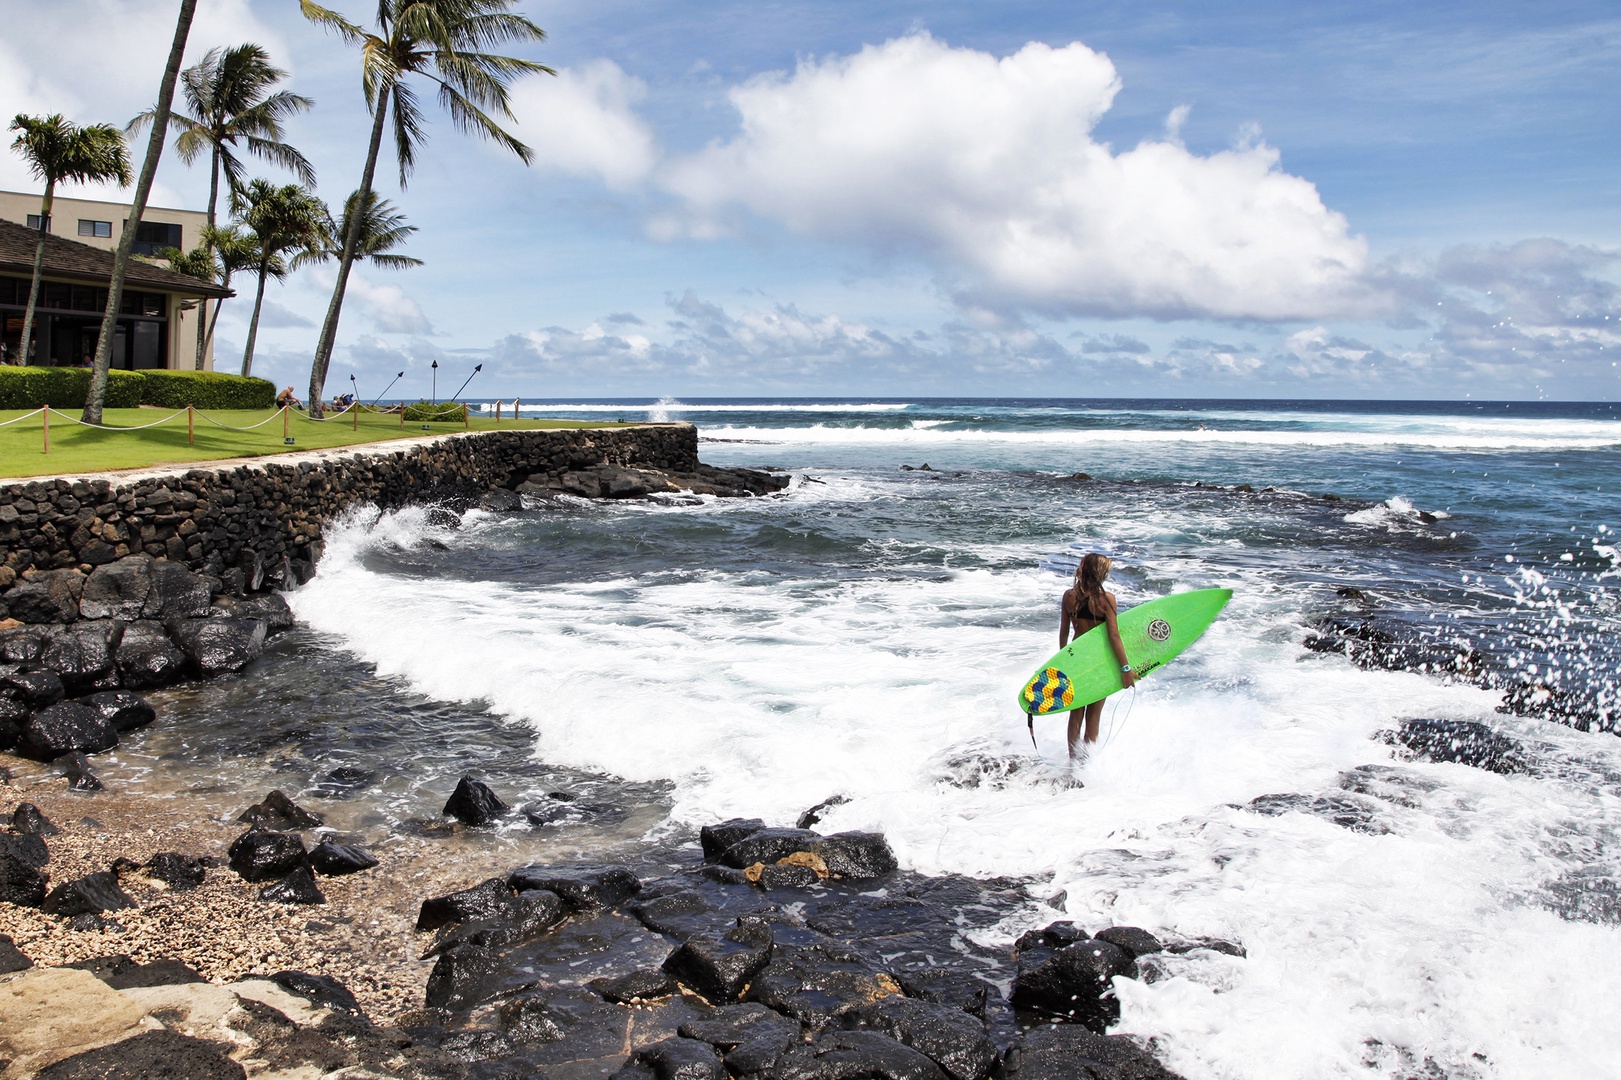 Koloa Vacation Rentals, Kukui'ula Villa #8 - PK's surf break to watch some of the most famous surfers in the World